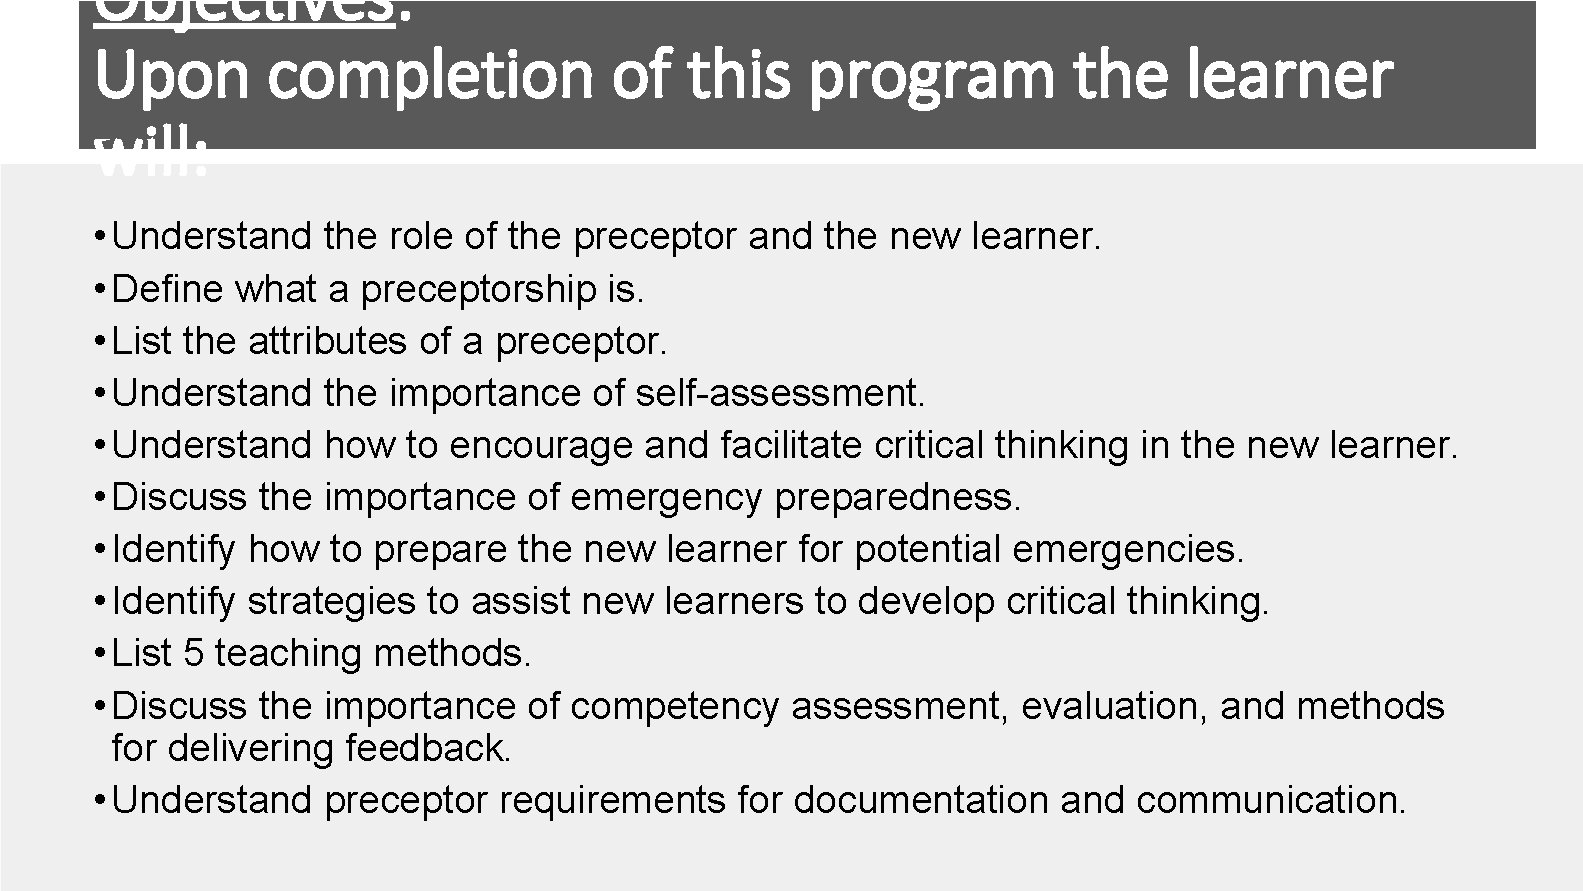 Objectives: Upon completion of this program the learner will: • Understand the role of